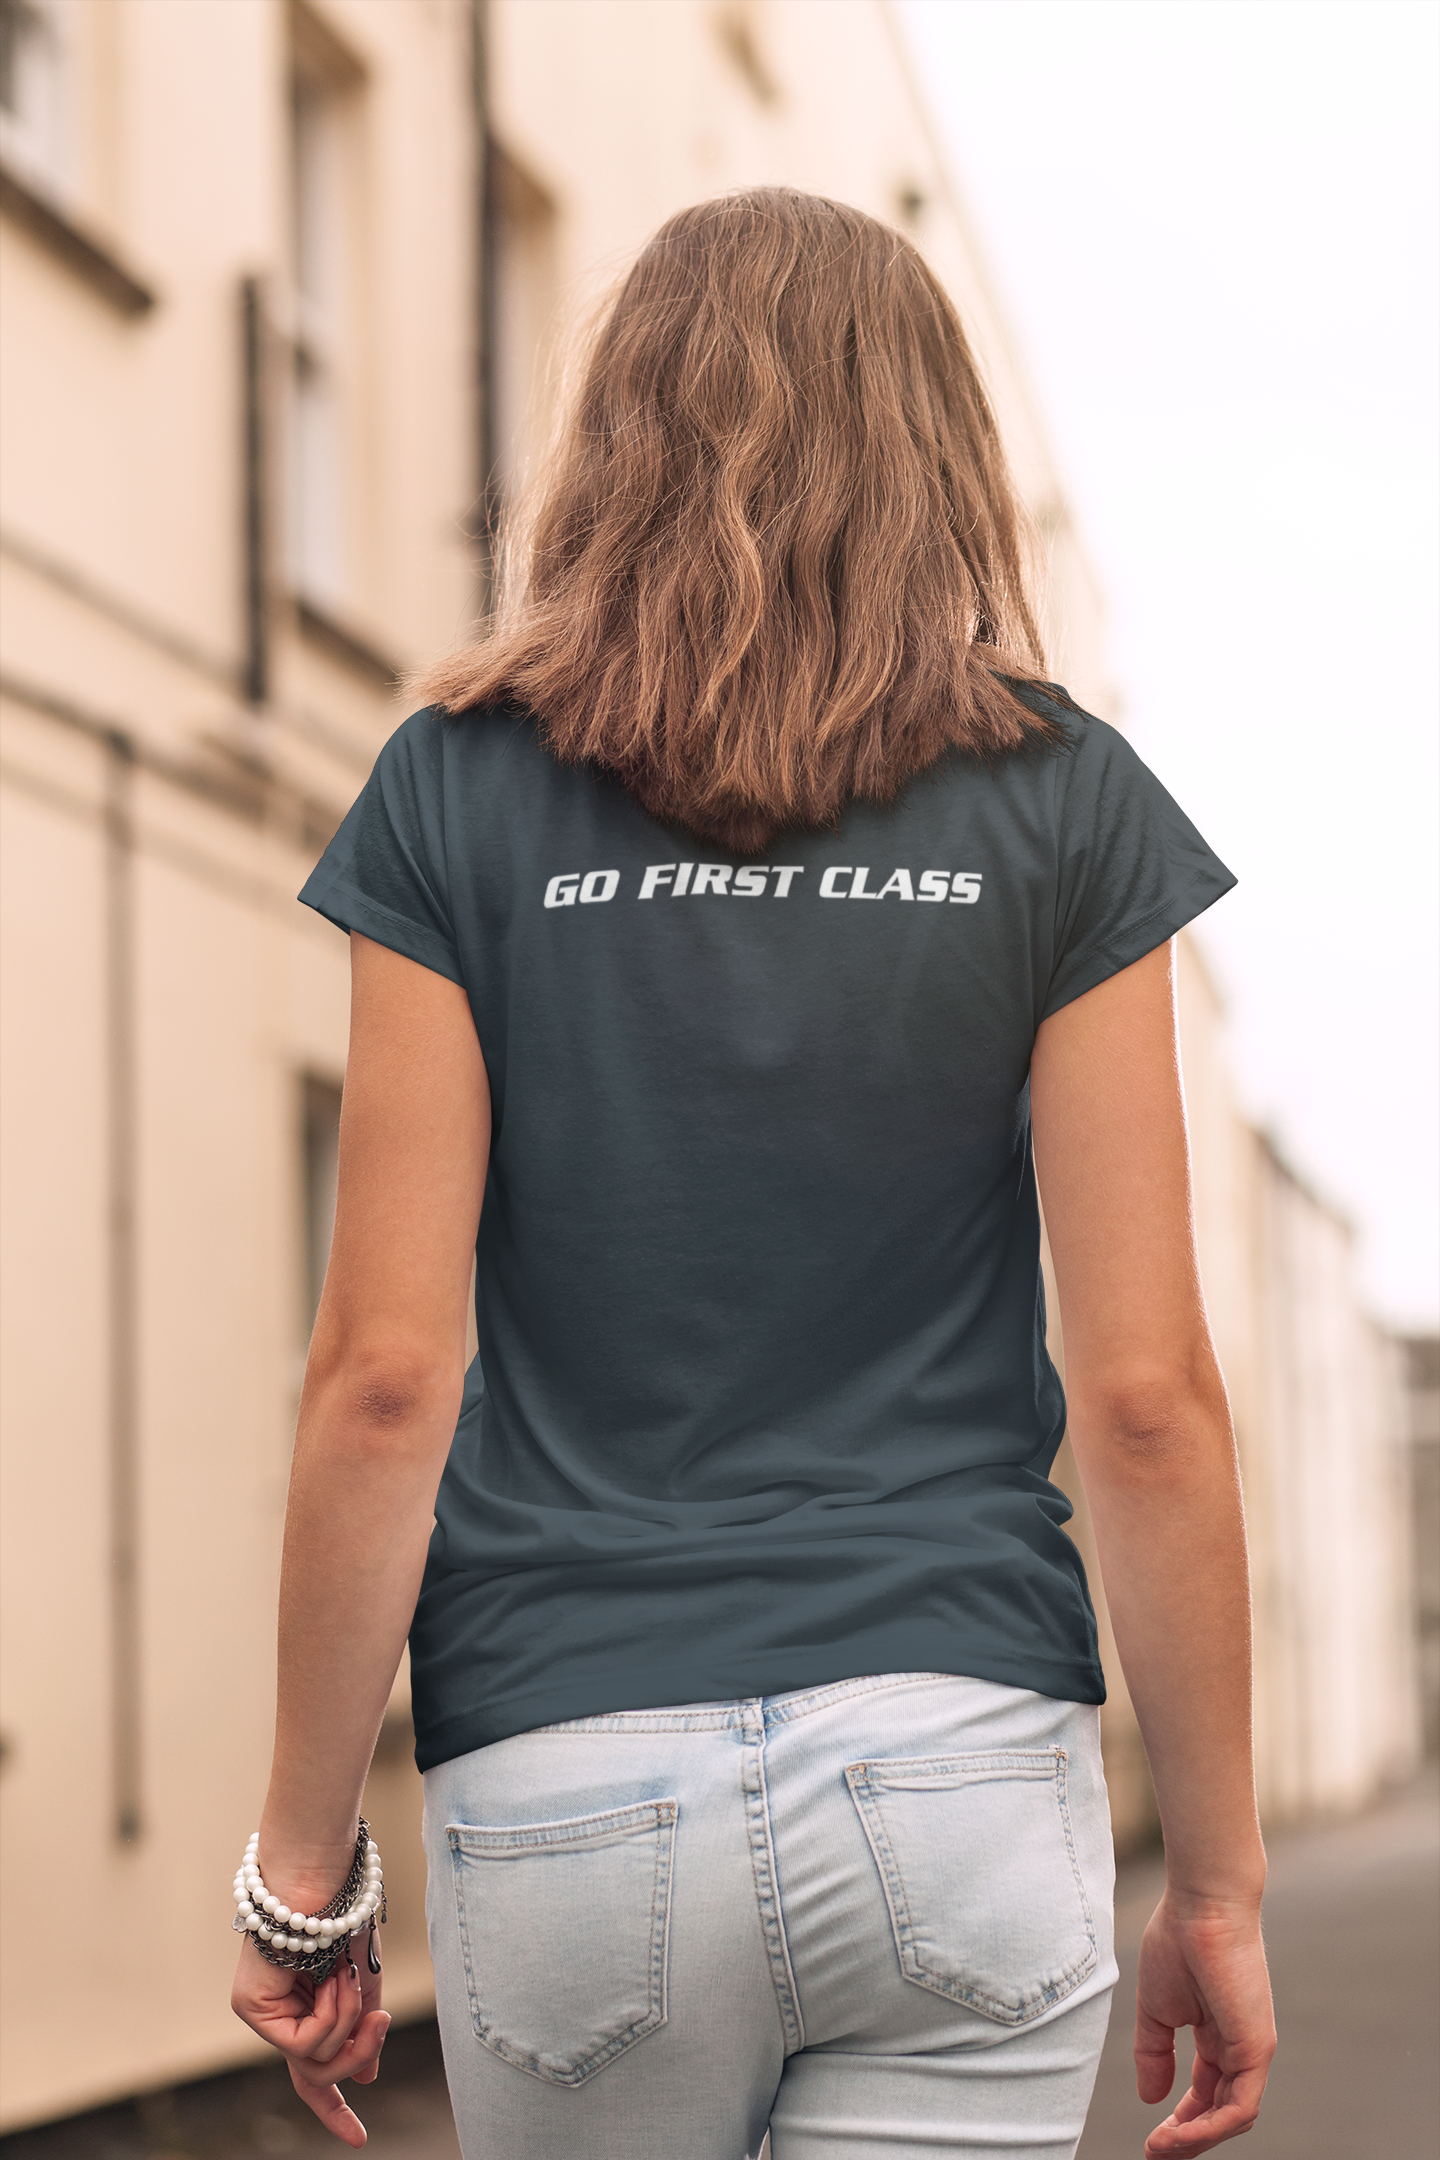 First Class Racing DBL side Ladies' T-Shirt